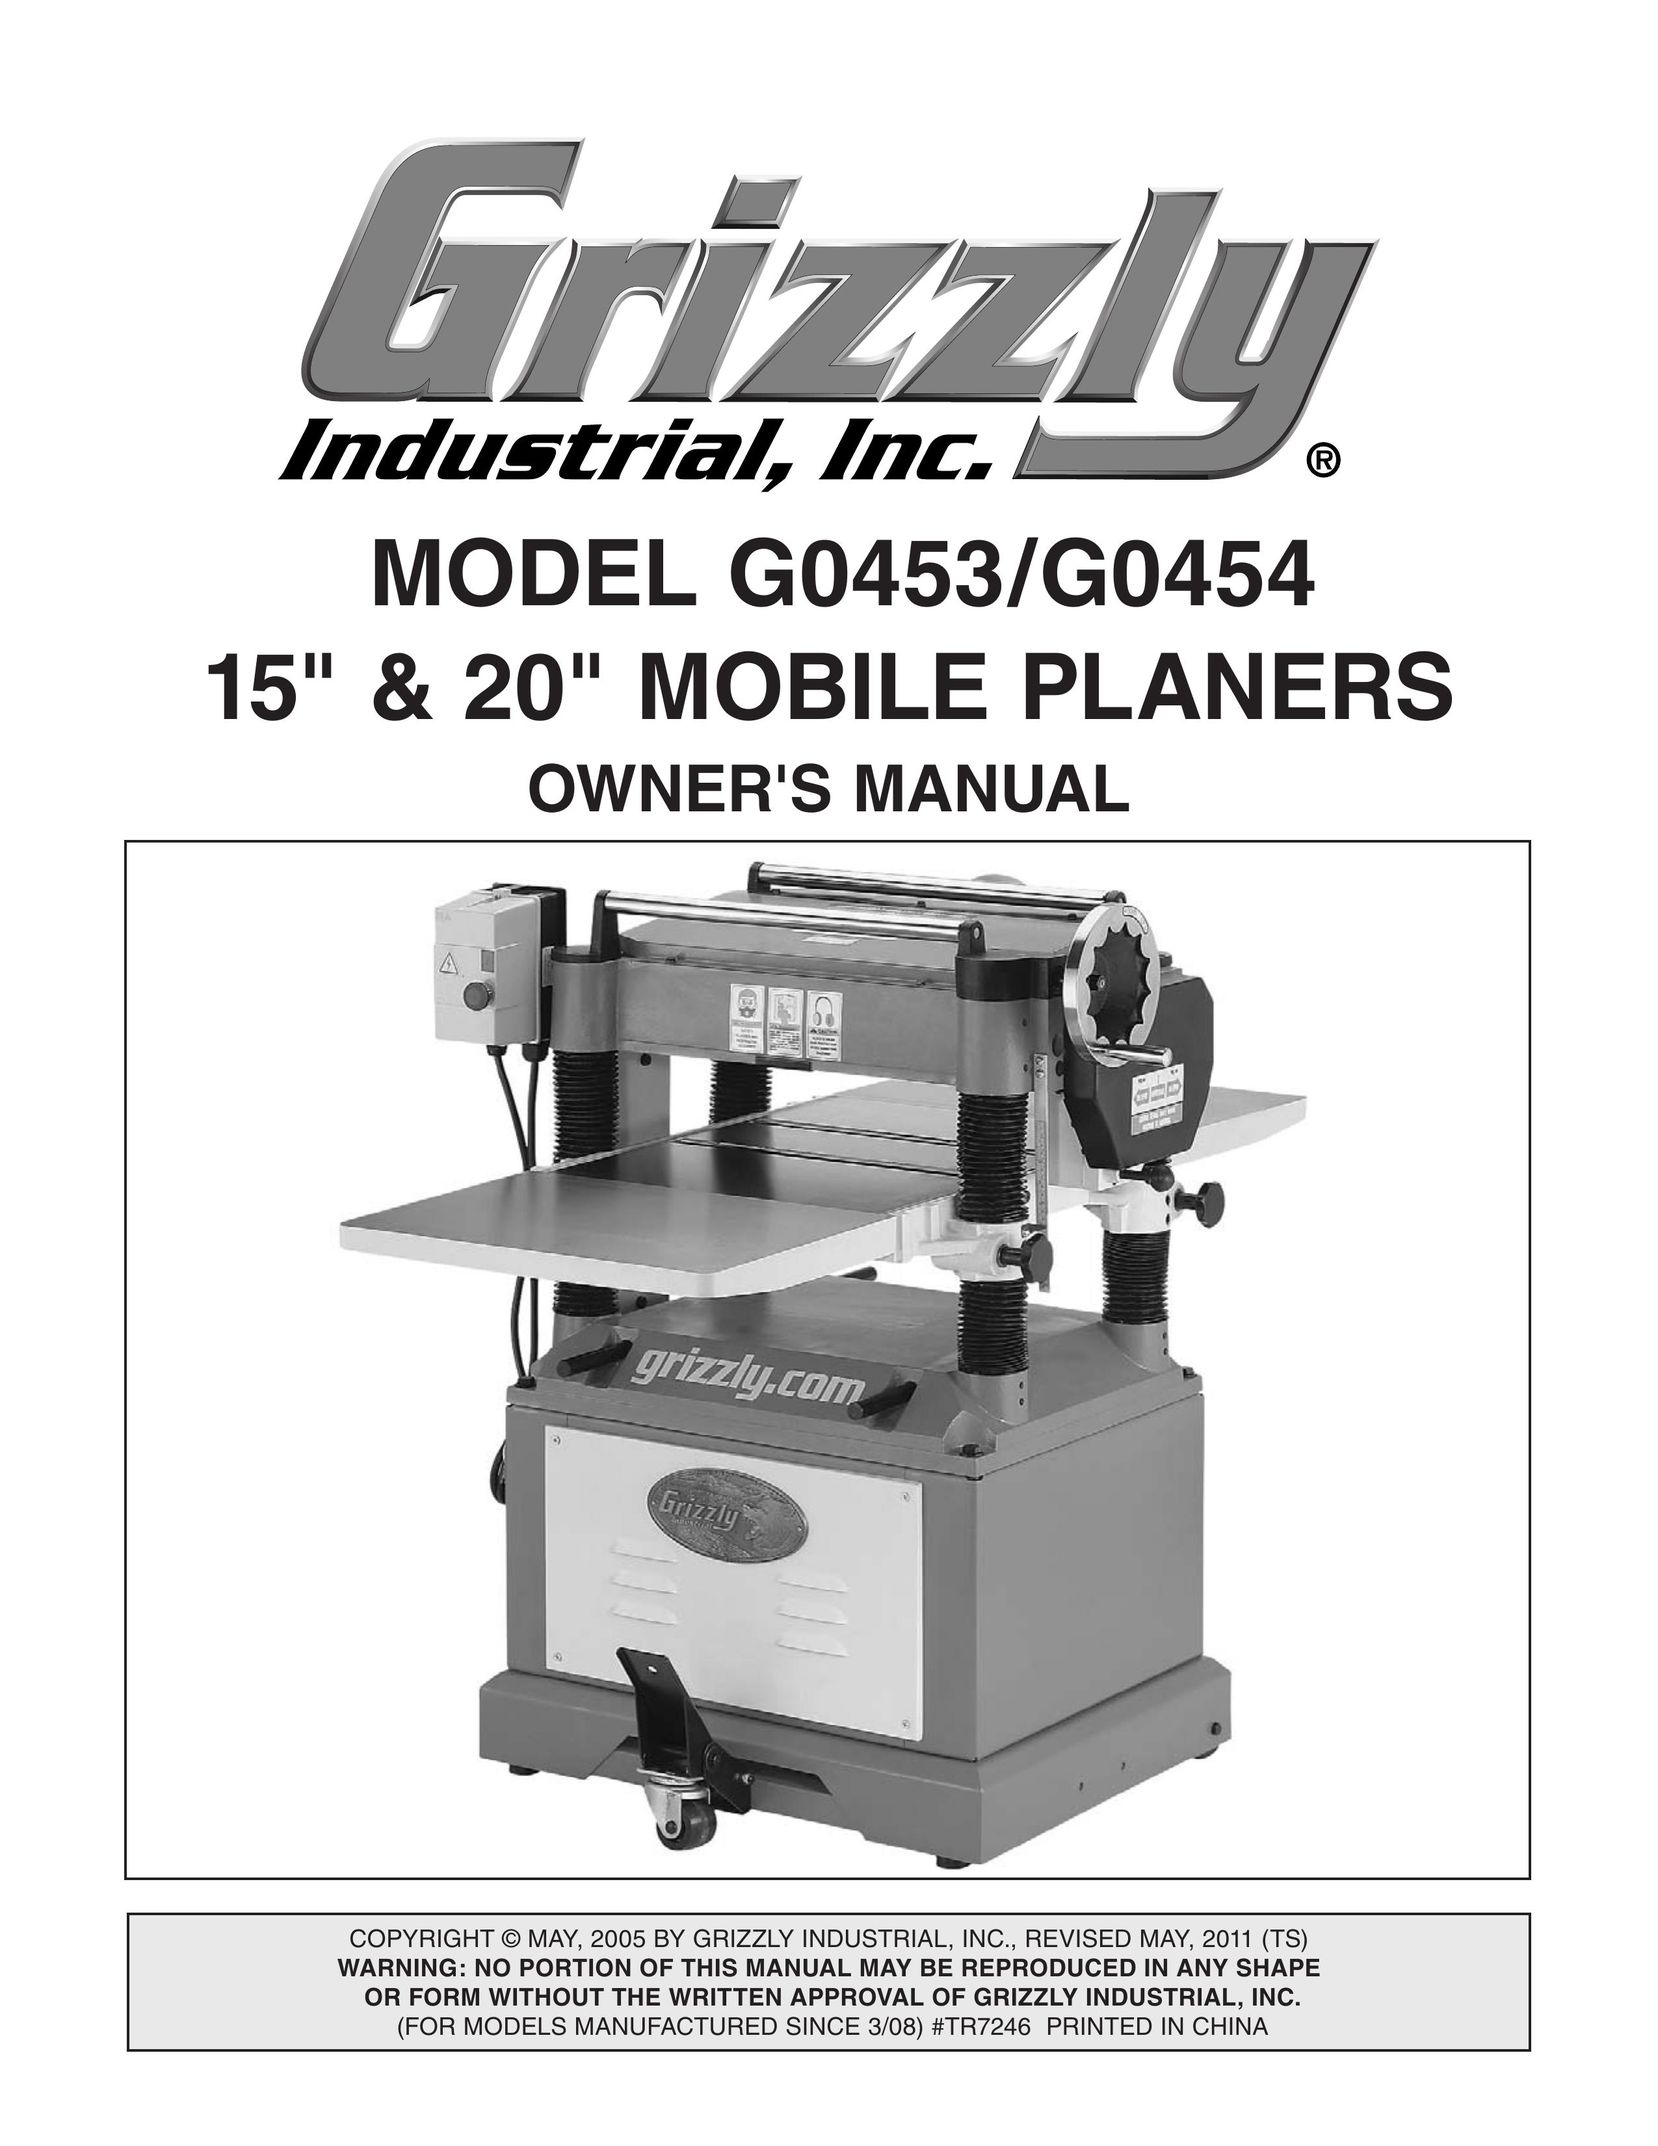 Grizzly G0453 Planer User Manual